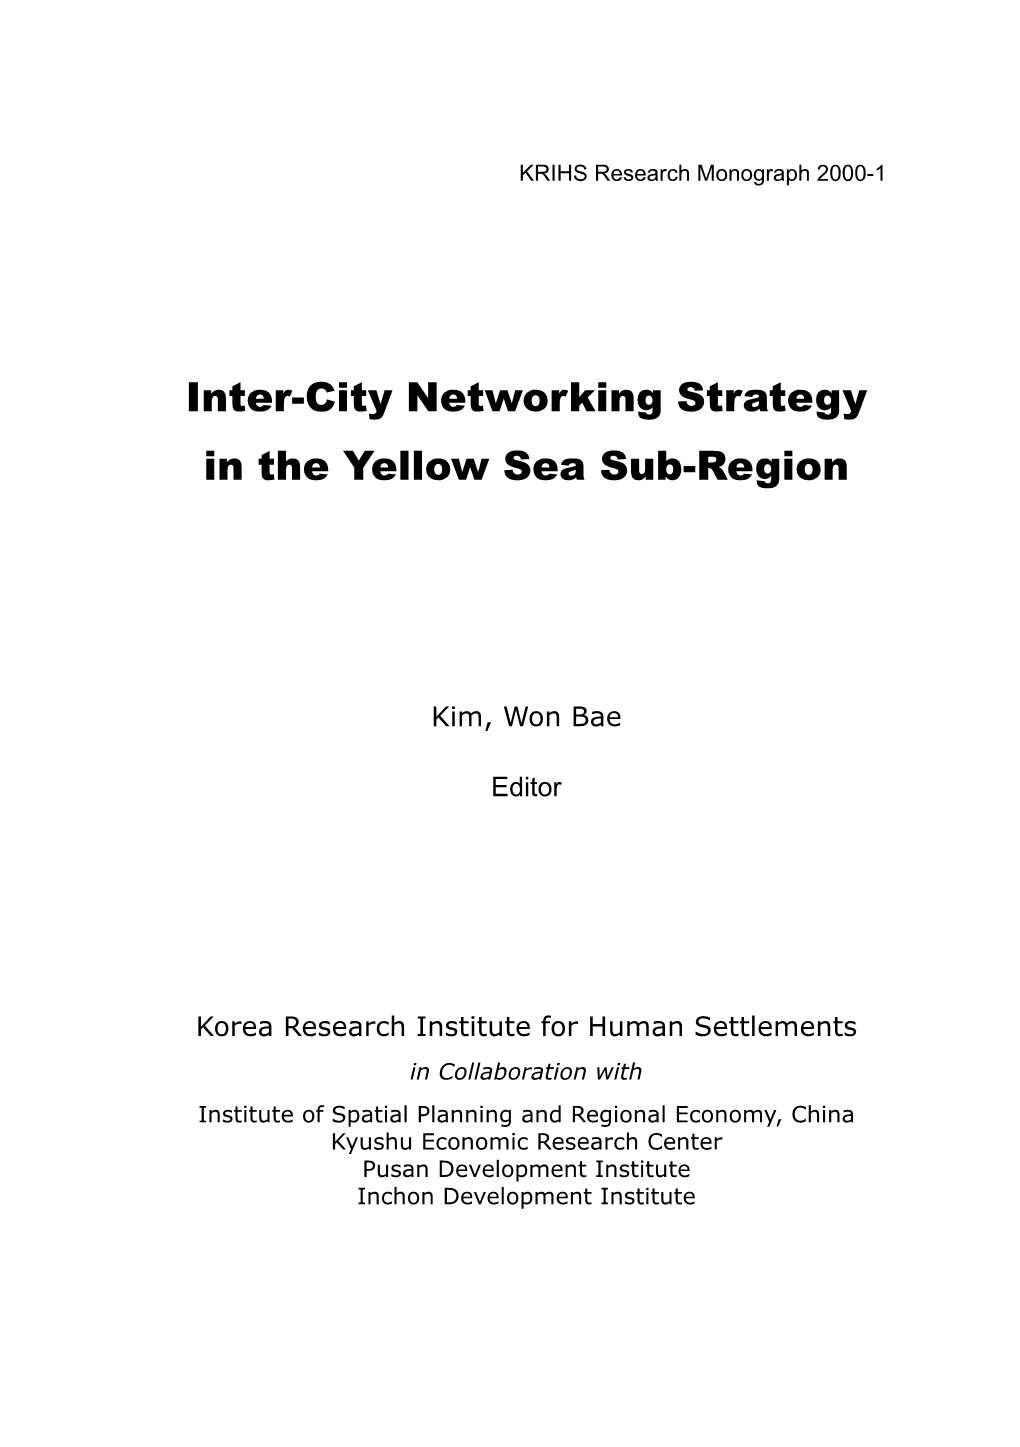 Inter-City Networking Strategy in the Yellow Sea Sub-Region